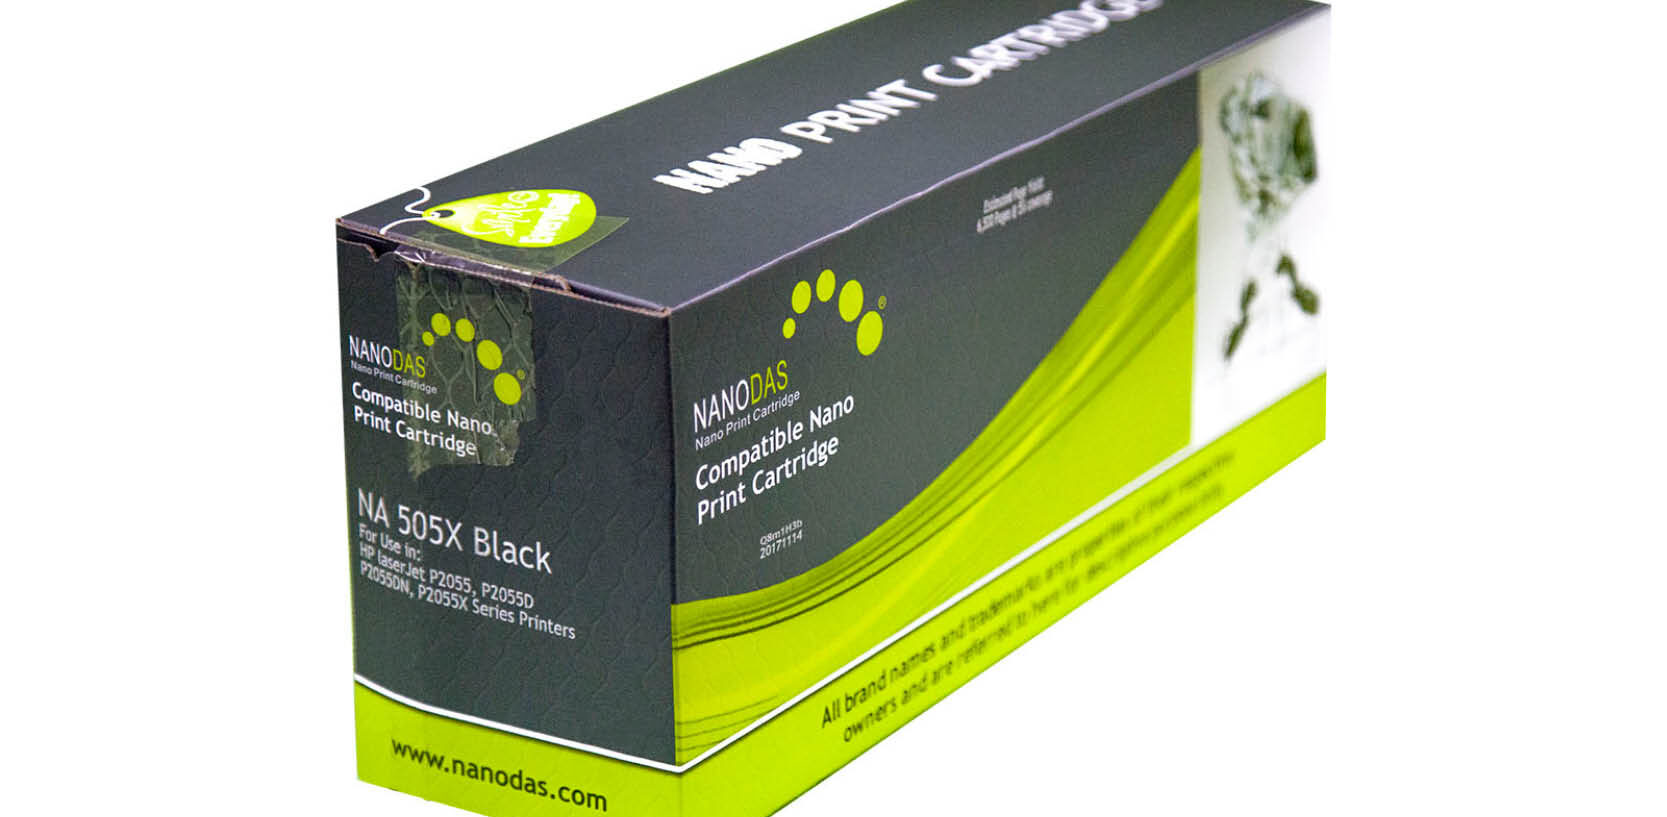 High-Quality Toner Cartridges with Best Prices